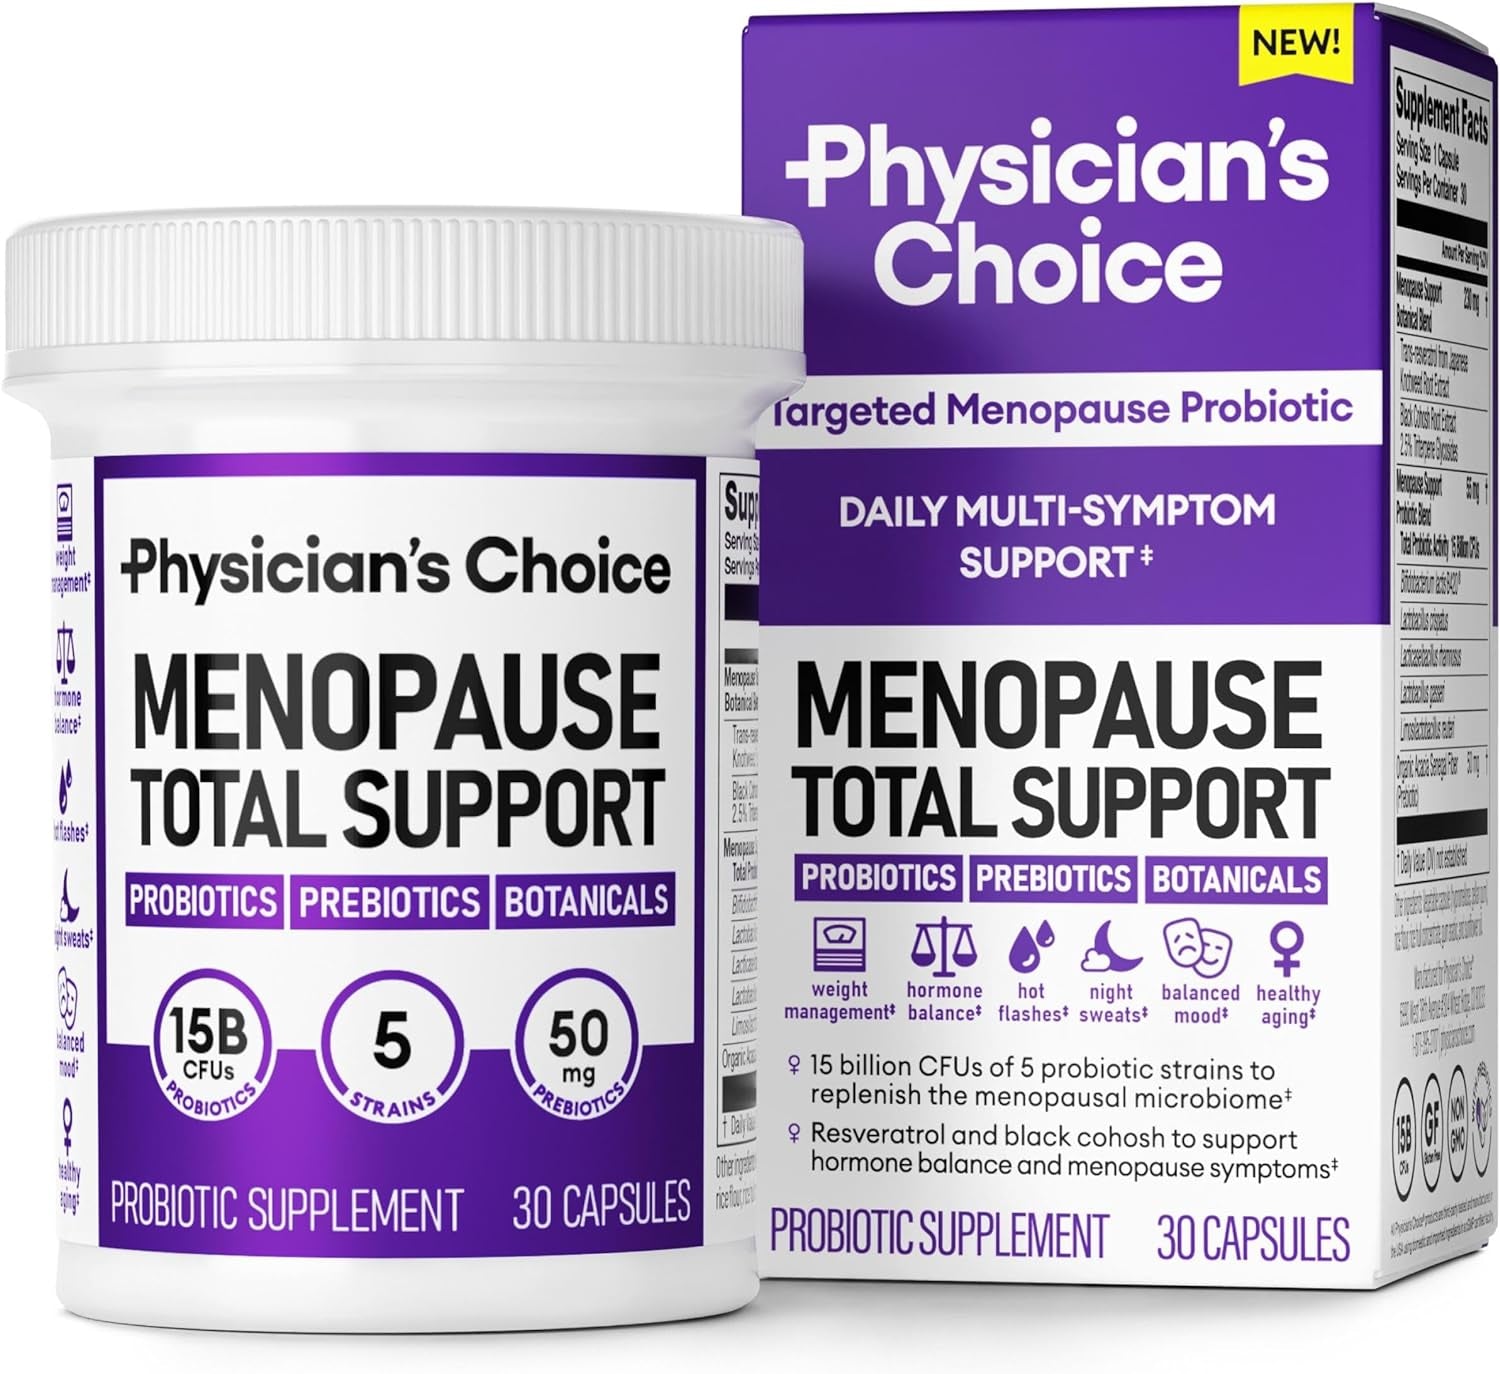 Menopause Probiotic Support for Women - Hormone Balance, Hot Flashes, Weight Management - 30 Capsules